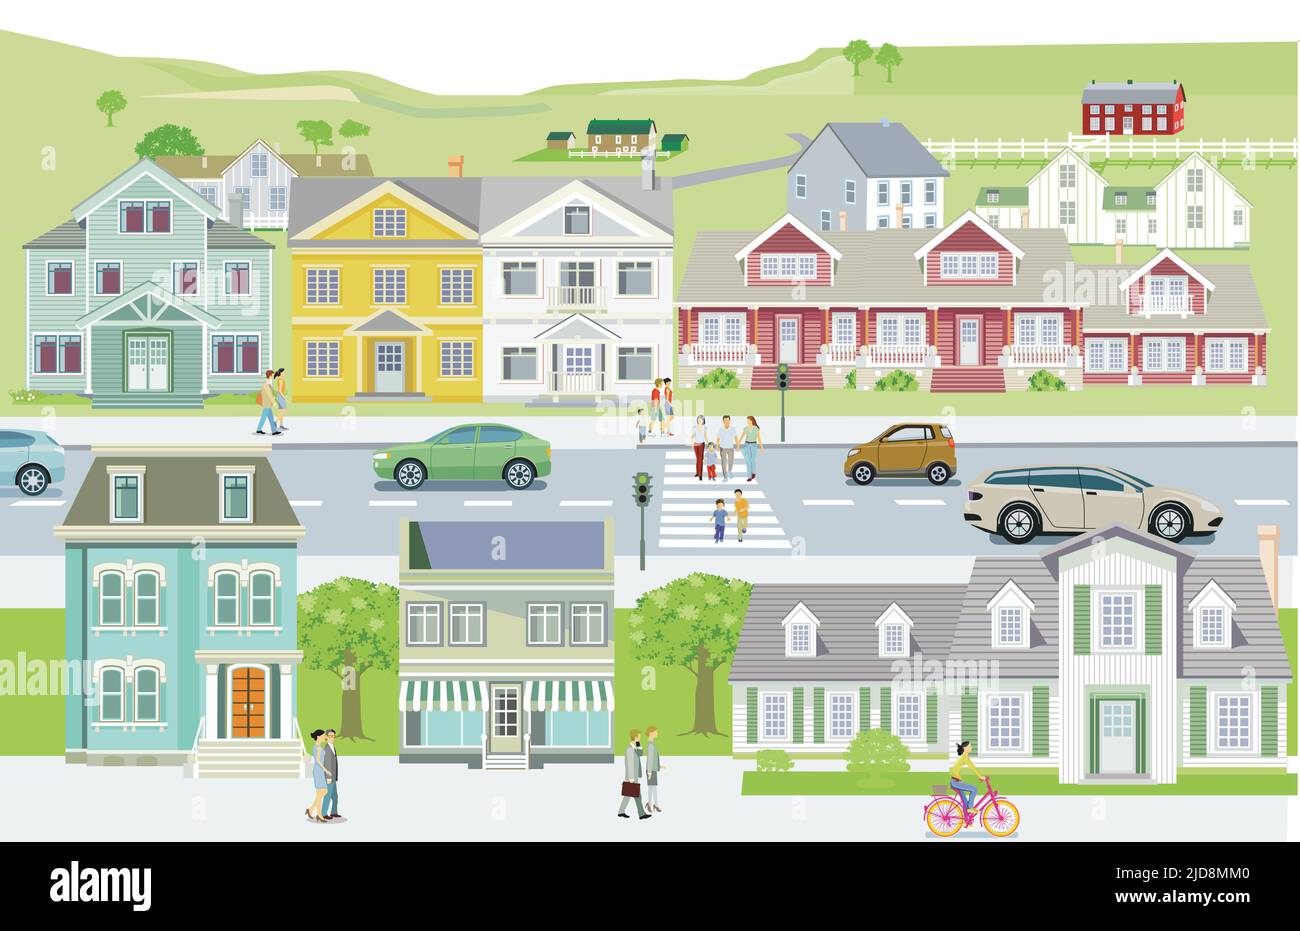 Street in small town, building exterior and traffic illustration Stock Vector